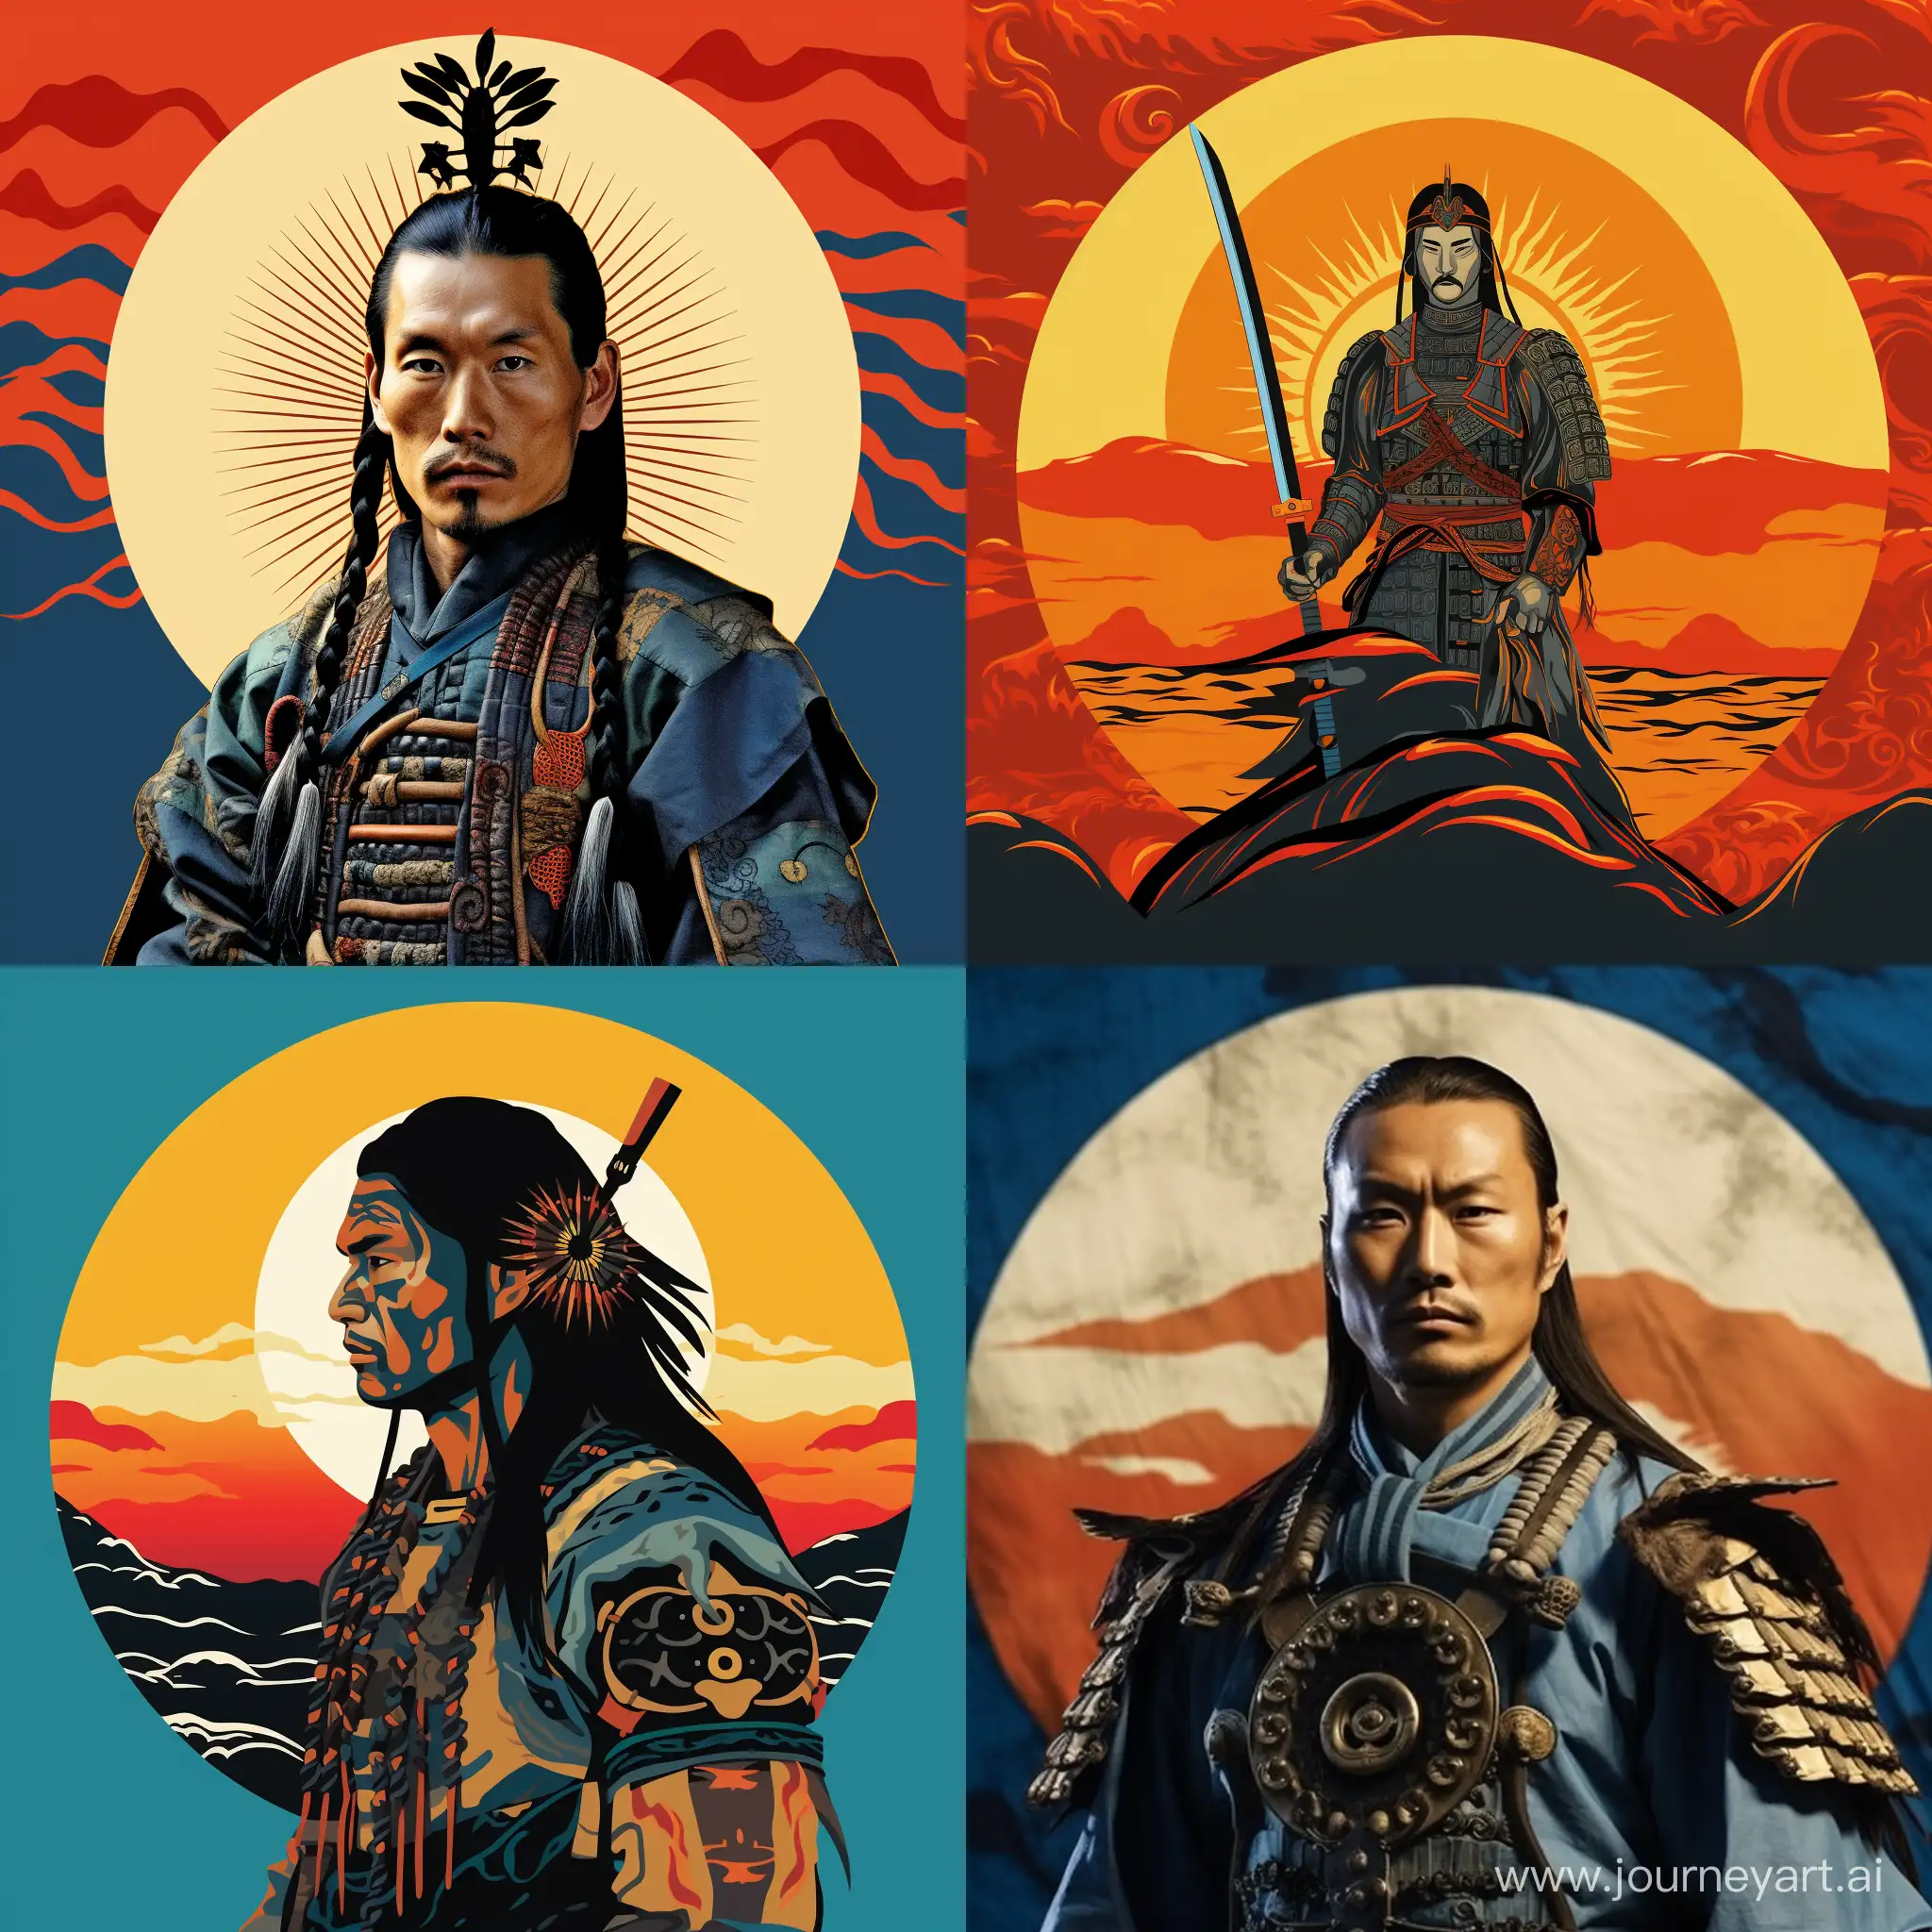 Kazakh samurai on the background of the sun in the form of a Kazakh flag